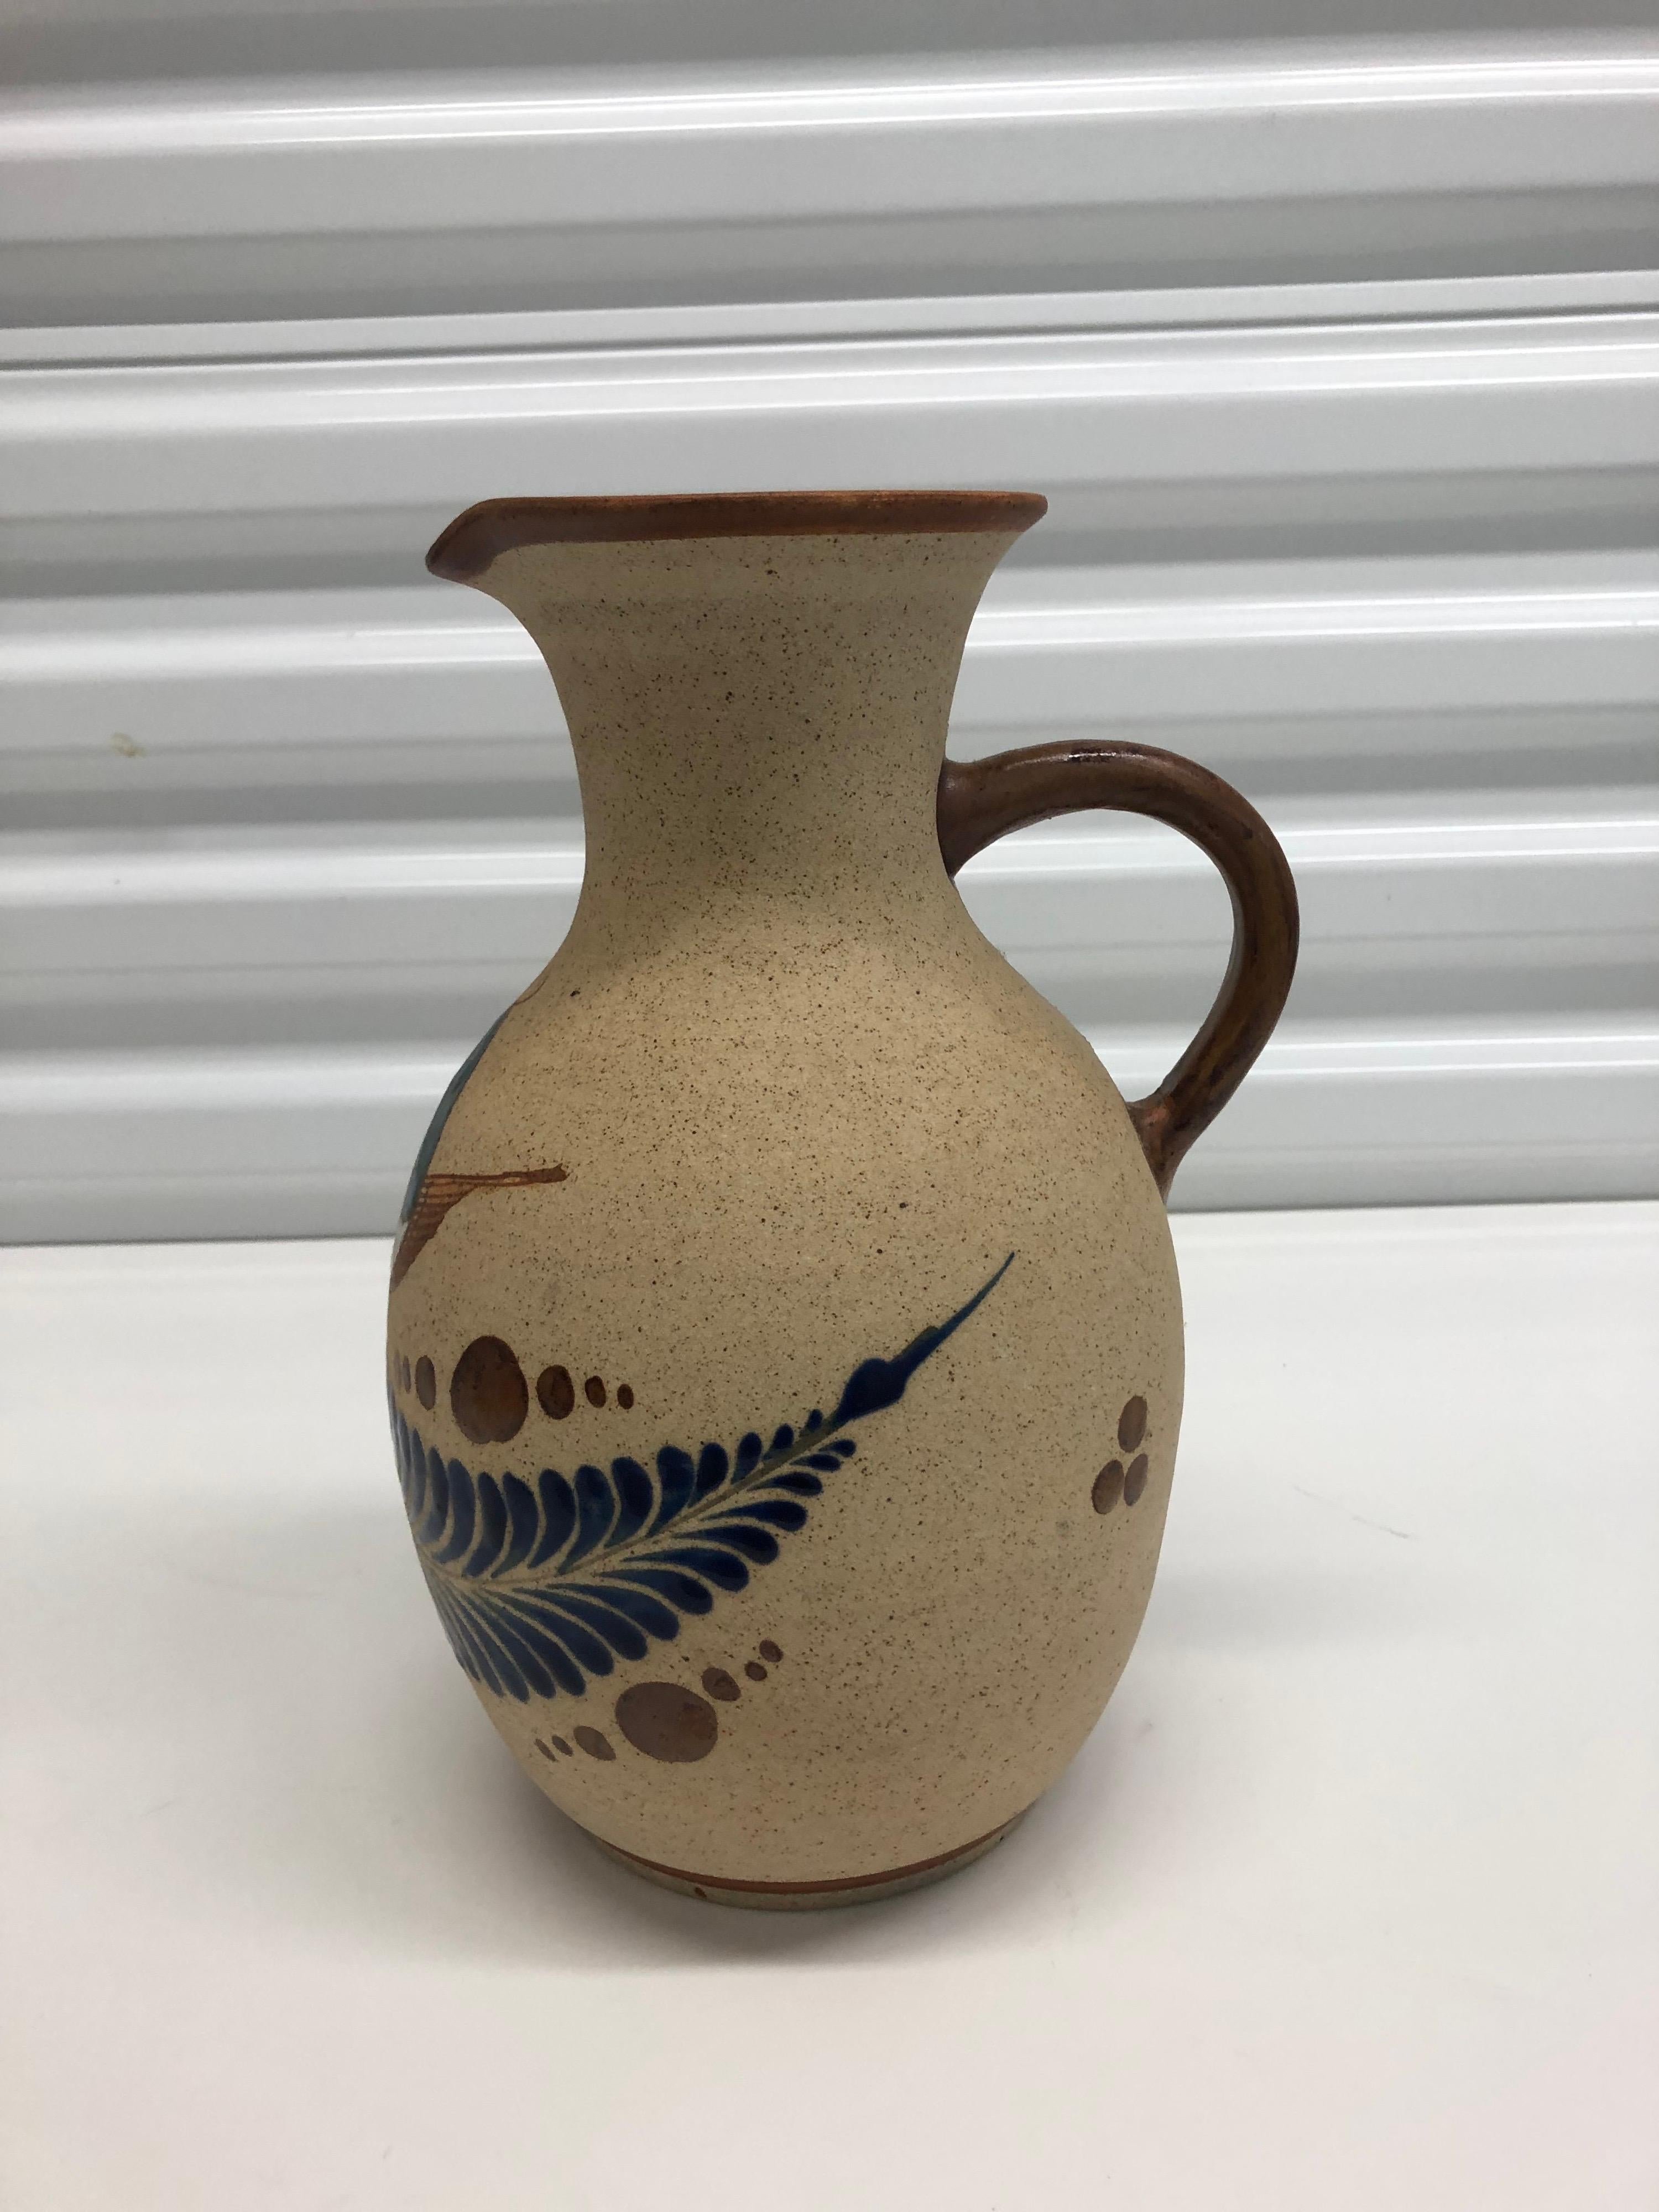 Large Mexican Tonala water jug.
Fully glazed inside, depicting bird and feather.
In shades of royal blue, green, brown and white.
Size: 11